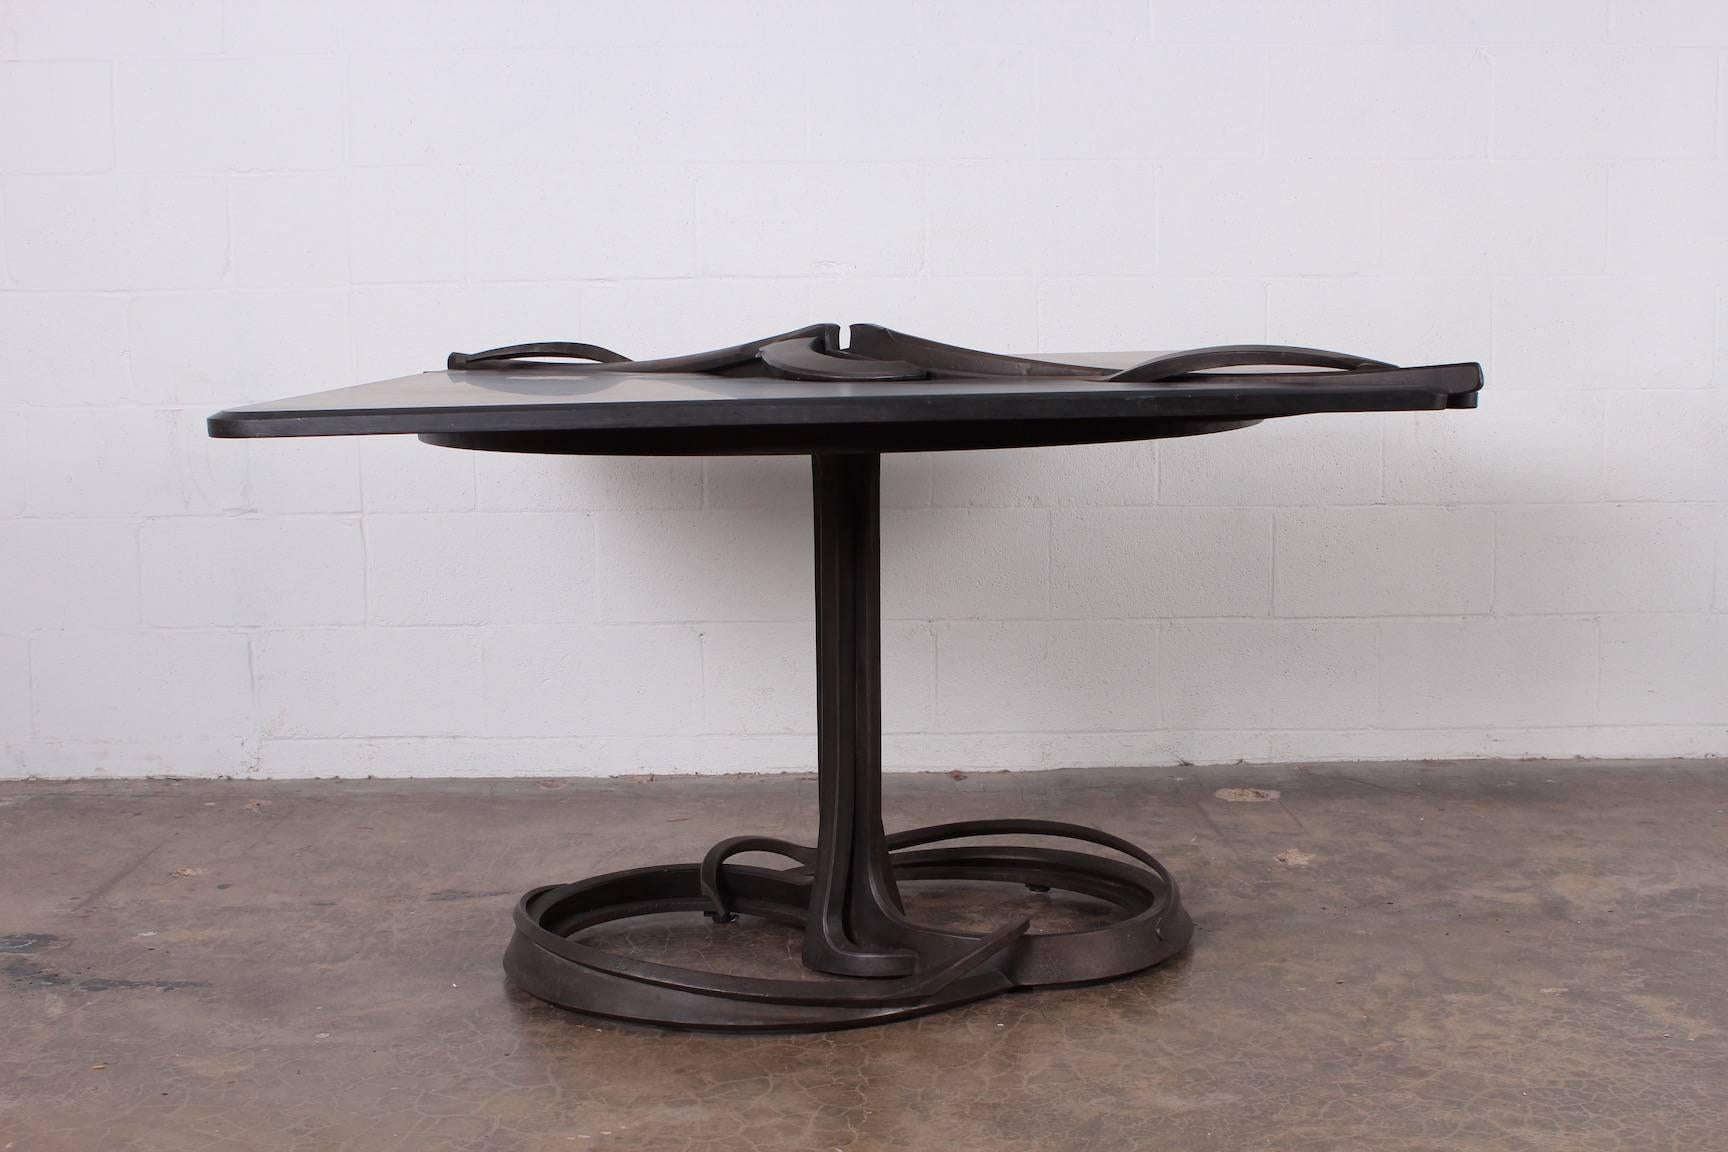 A forged steel and carved stone dining center table by Albert Paley. Stamped PALEY 1982. Published: Lucie-Smith, The Art of Albert Paley, Abrams, 1996, p. 197; Museum of Fine Arts, Albert Paley: The Art of Metal exhibition catalogue, Springfield,